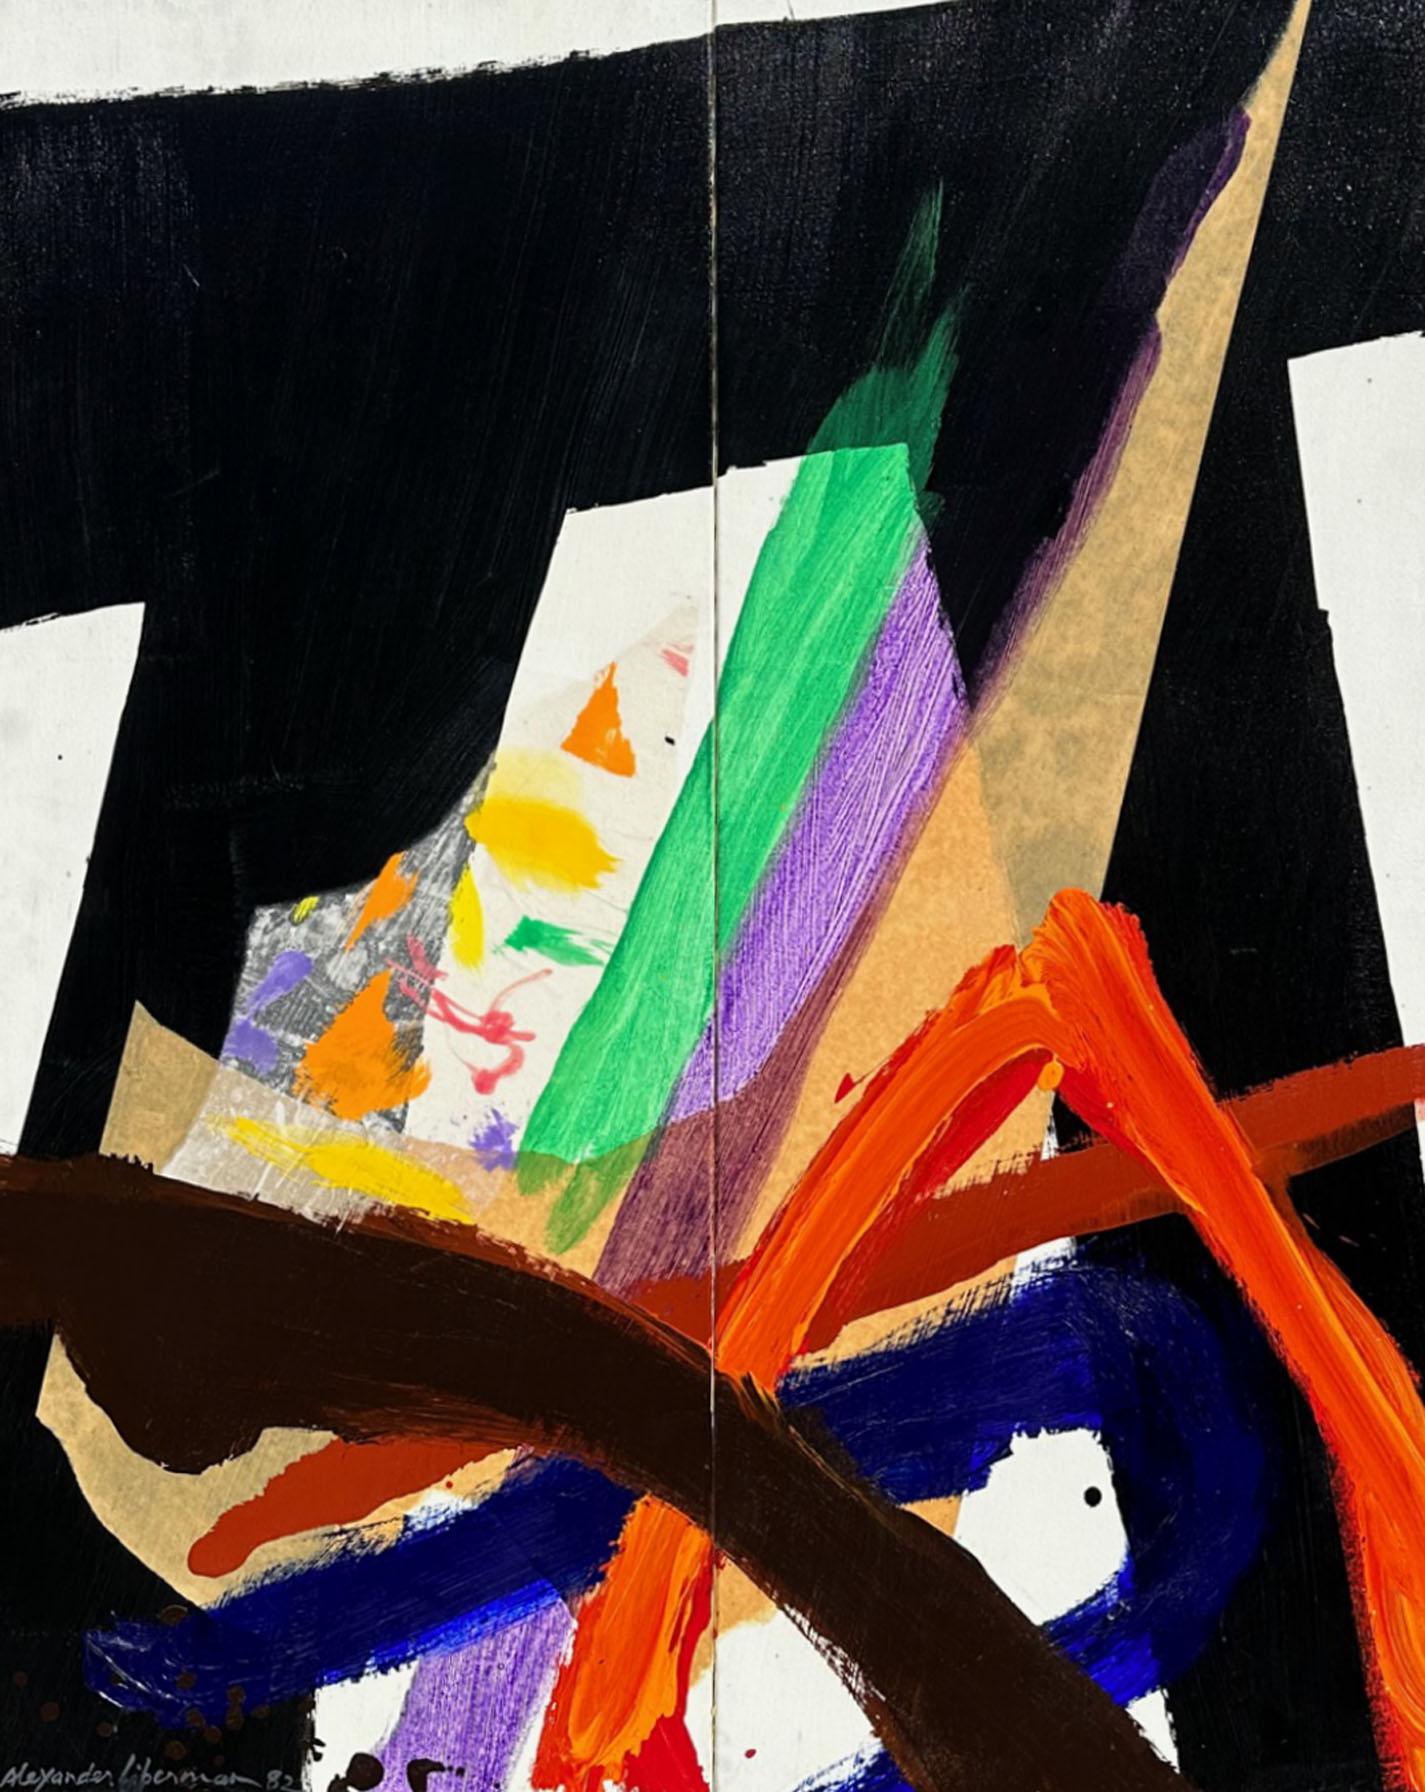 A 1982 abstract acrylic and collage on canvas painting by the Ukrainian-American artist Alexander Liberman (1912-1999). Signed and dated to the lower left corner, this painting stretches across two vertical canvases. Large brushstrokes come together